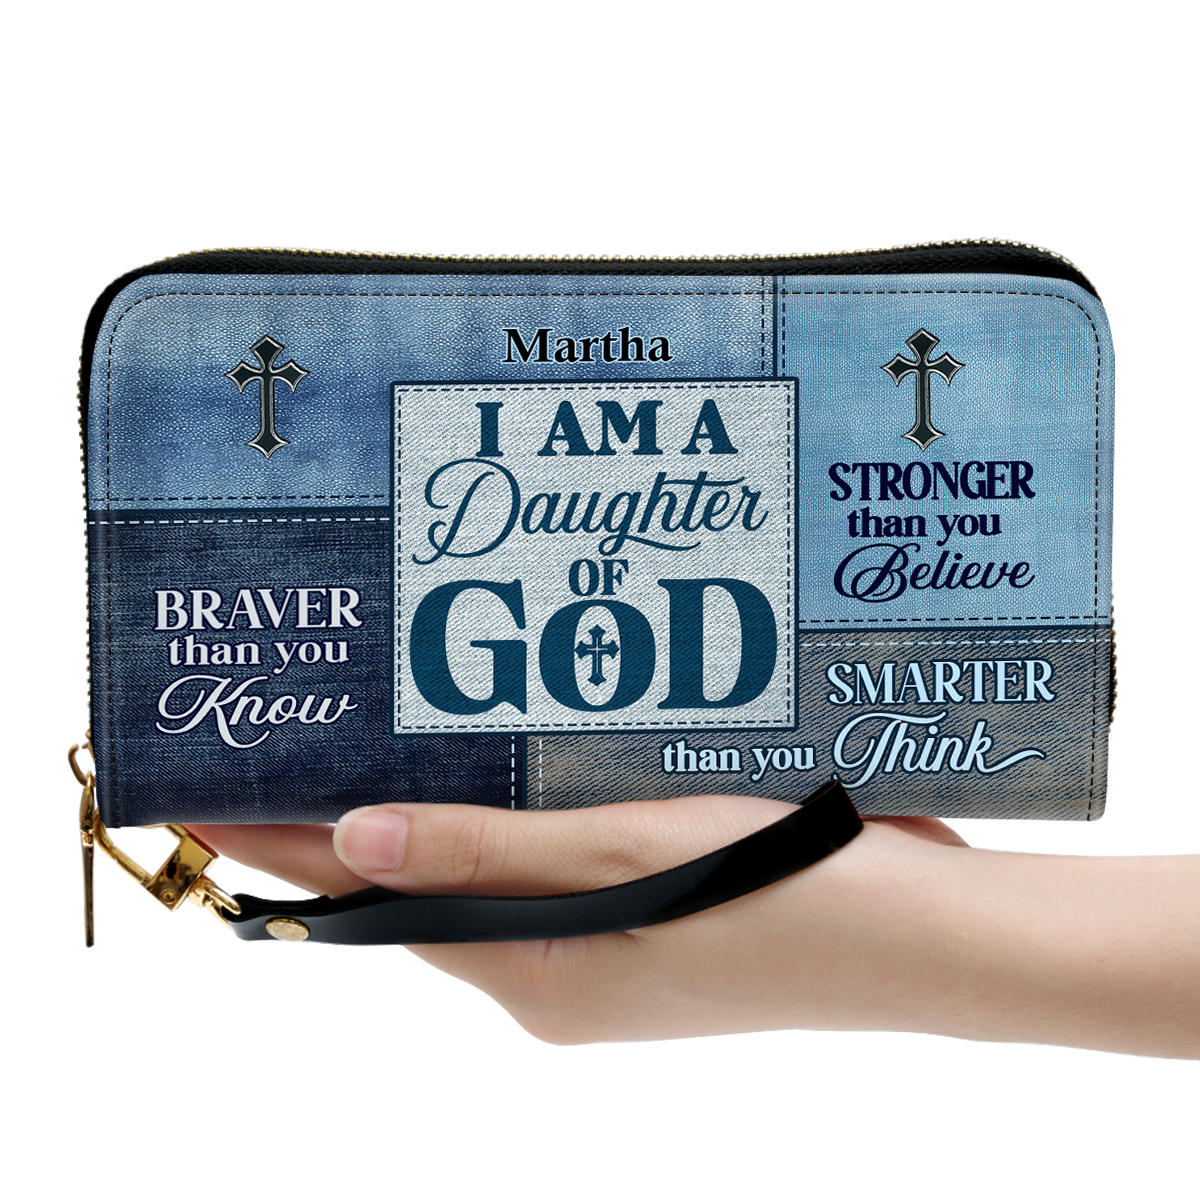 Jesuspirit | Personalized Leather Clutch Purse With Wristlet Strap Handle | Spiritual Gifts For Christian Women | Daughter Of God CPM764